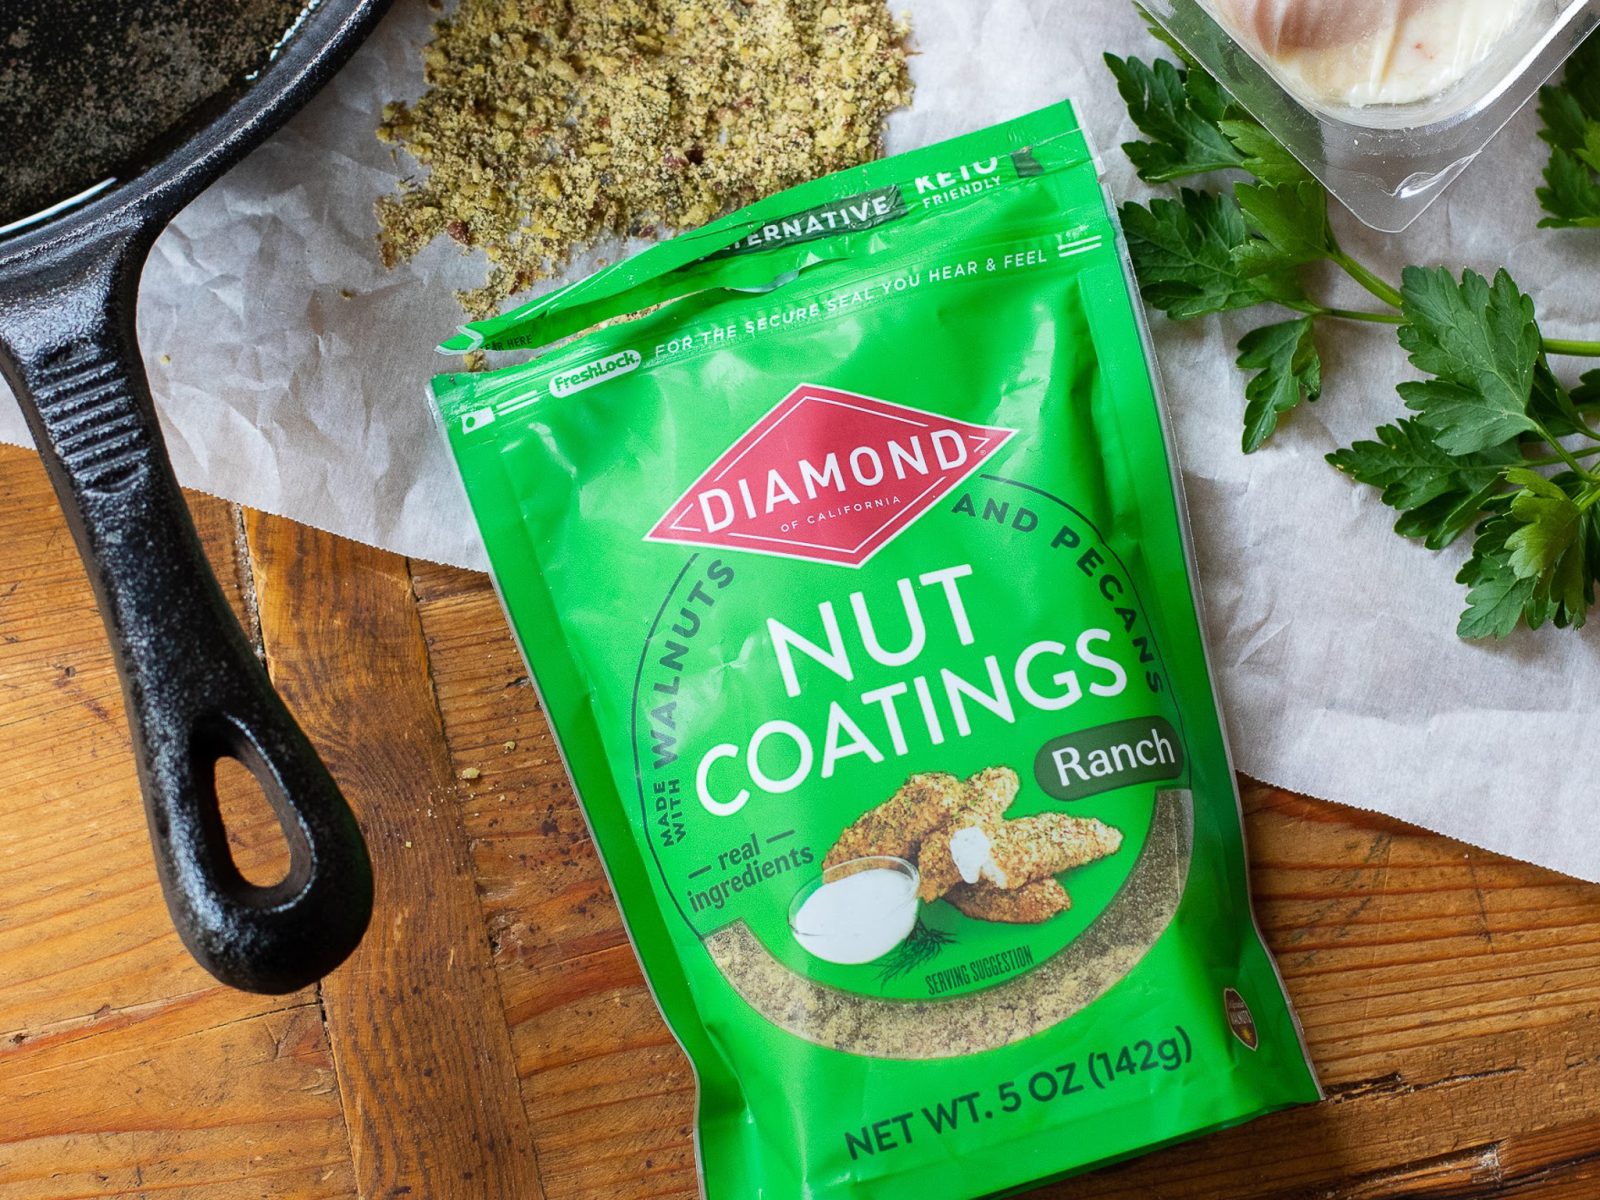 Grab The Bags Of Diamond of California Nut Coatings For Just 84¢ At